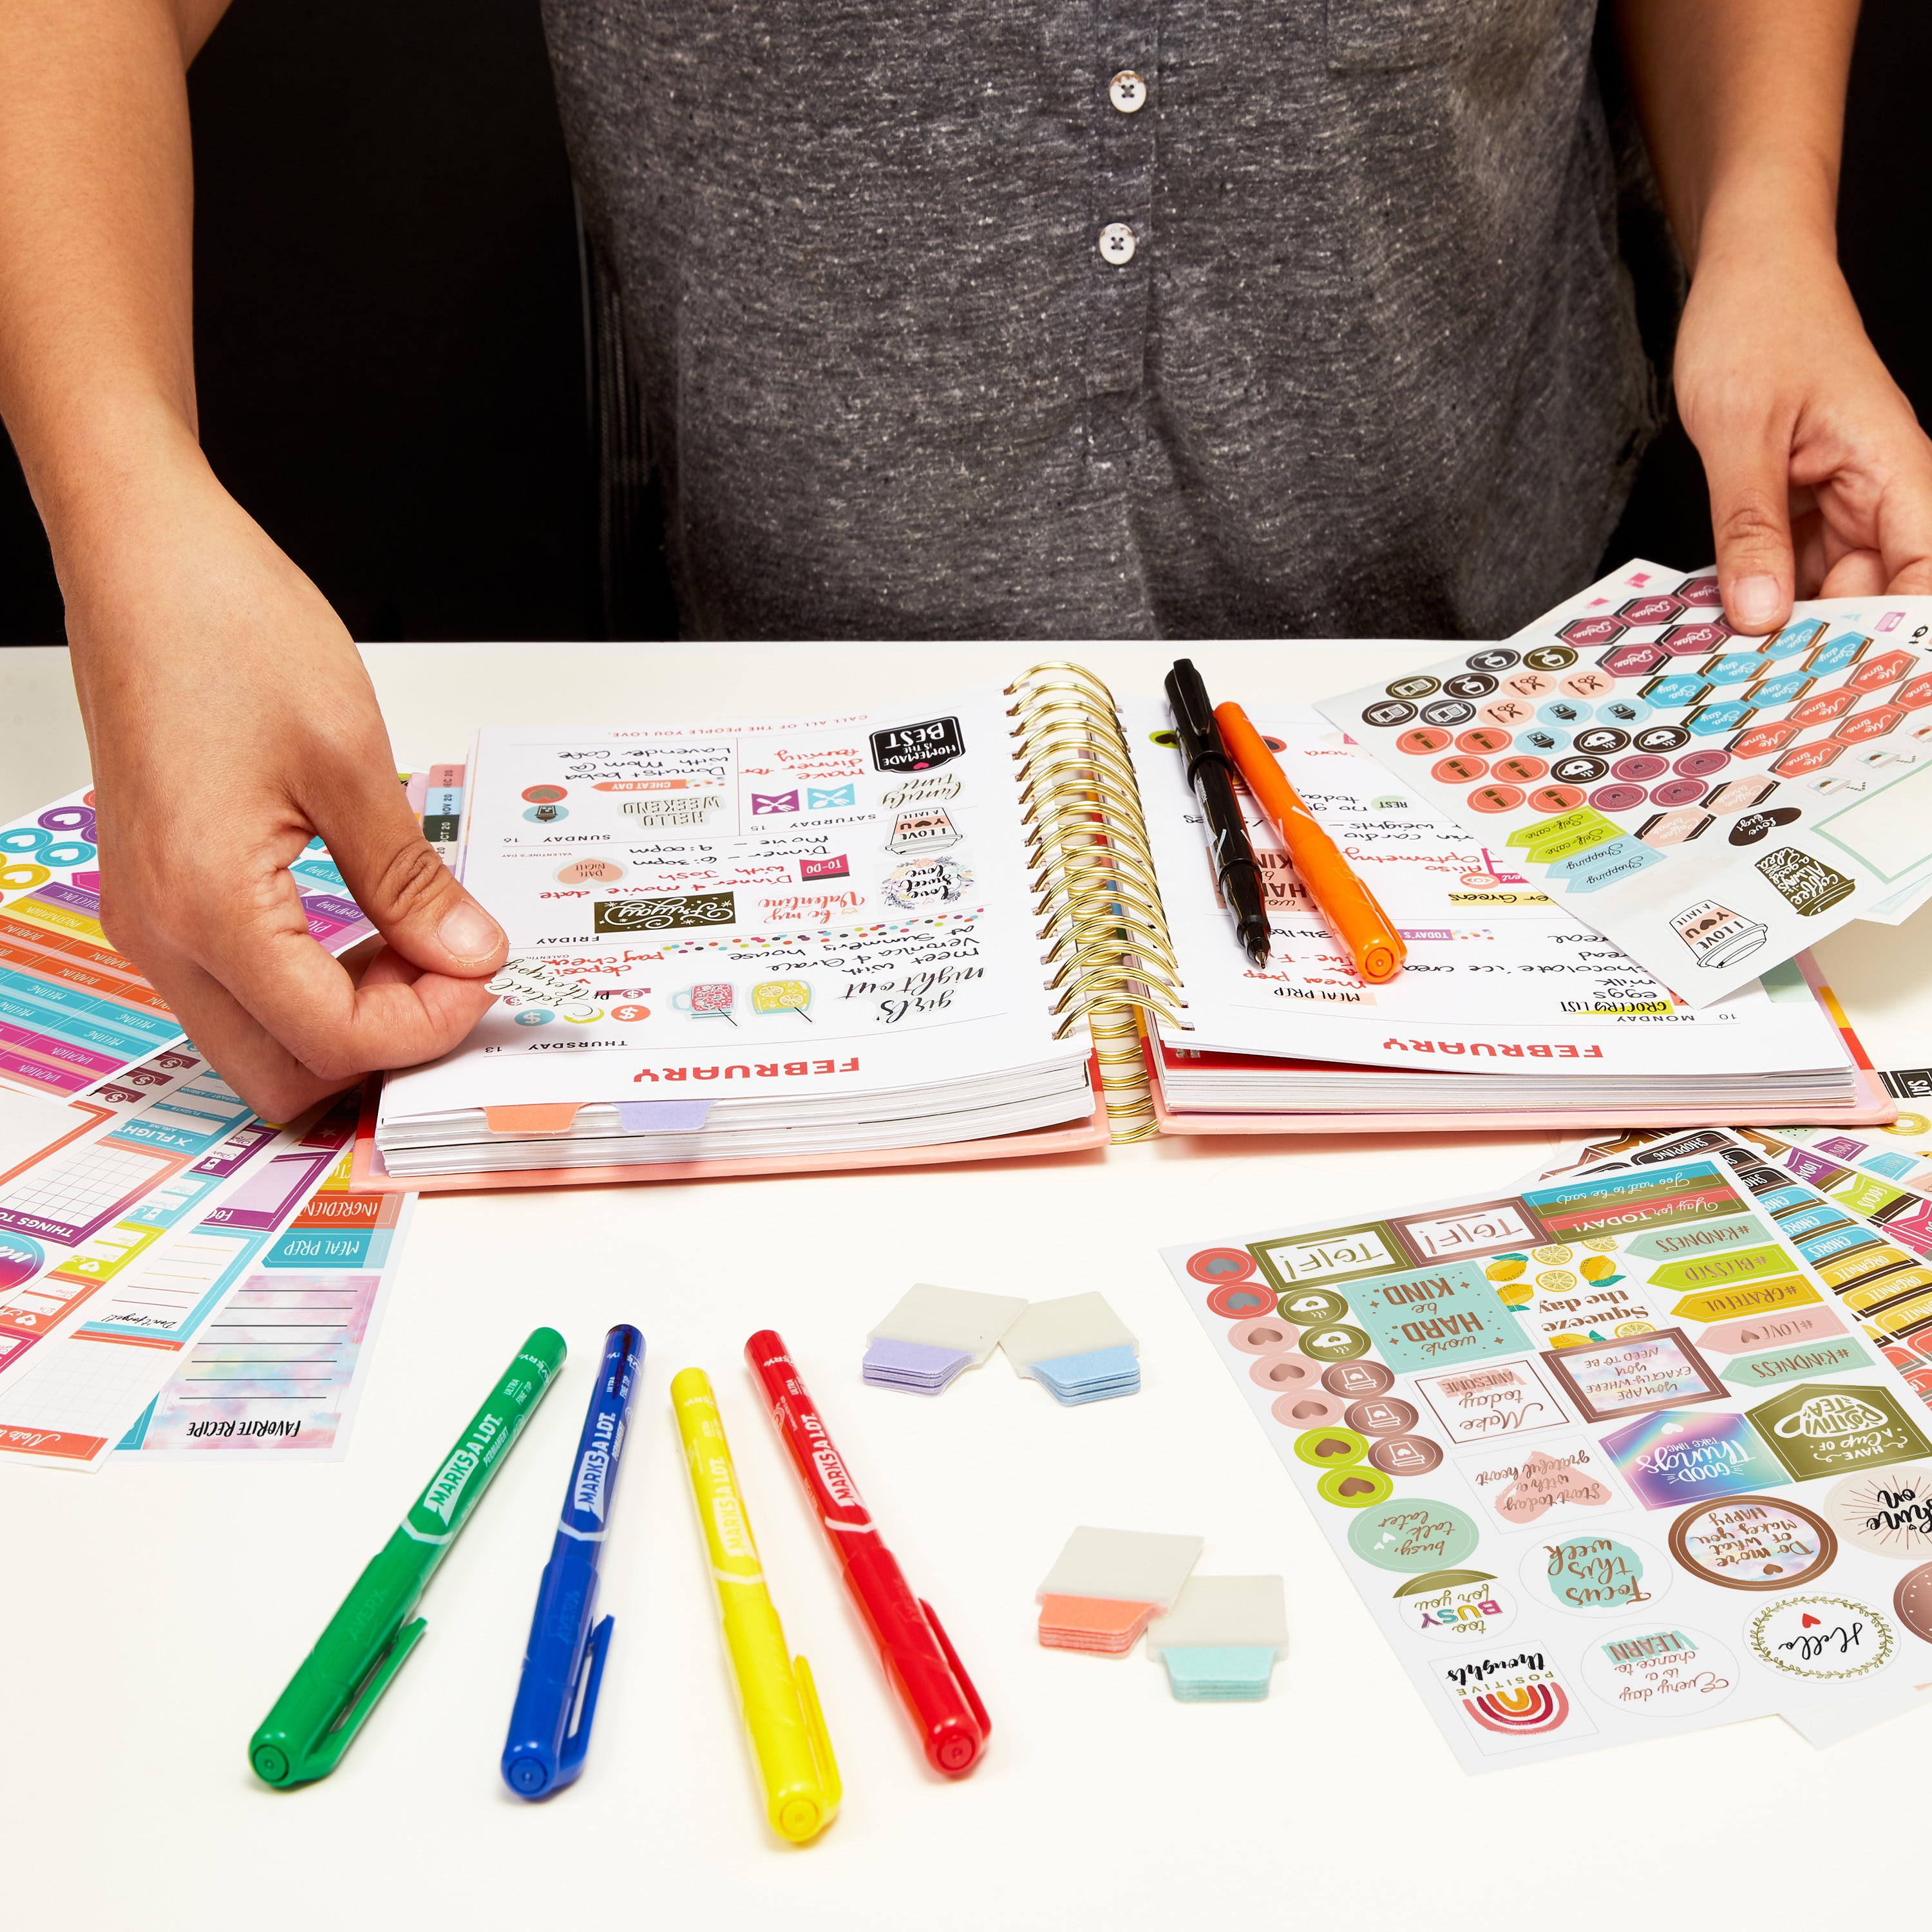  Planner Stickers Variety Bundle Set (Qty 860+) for